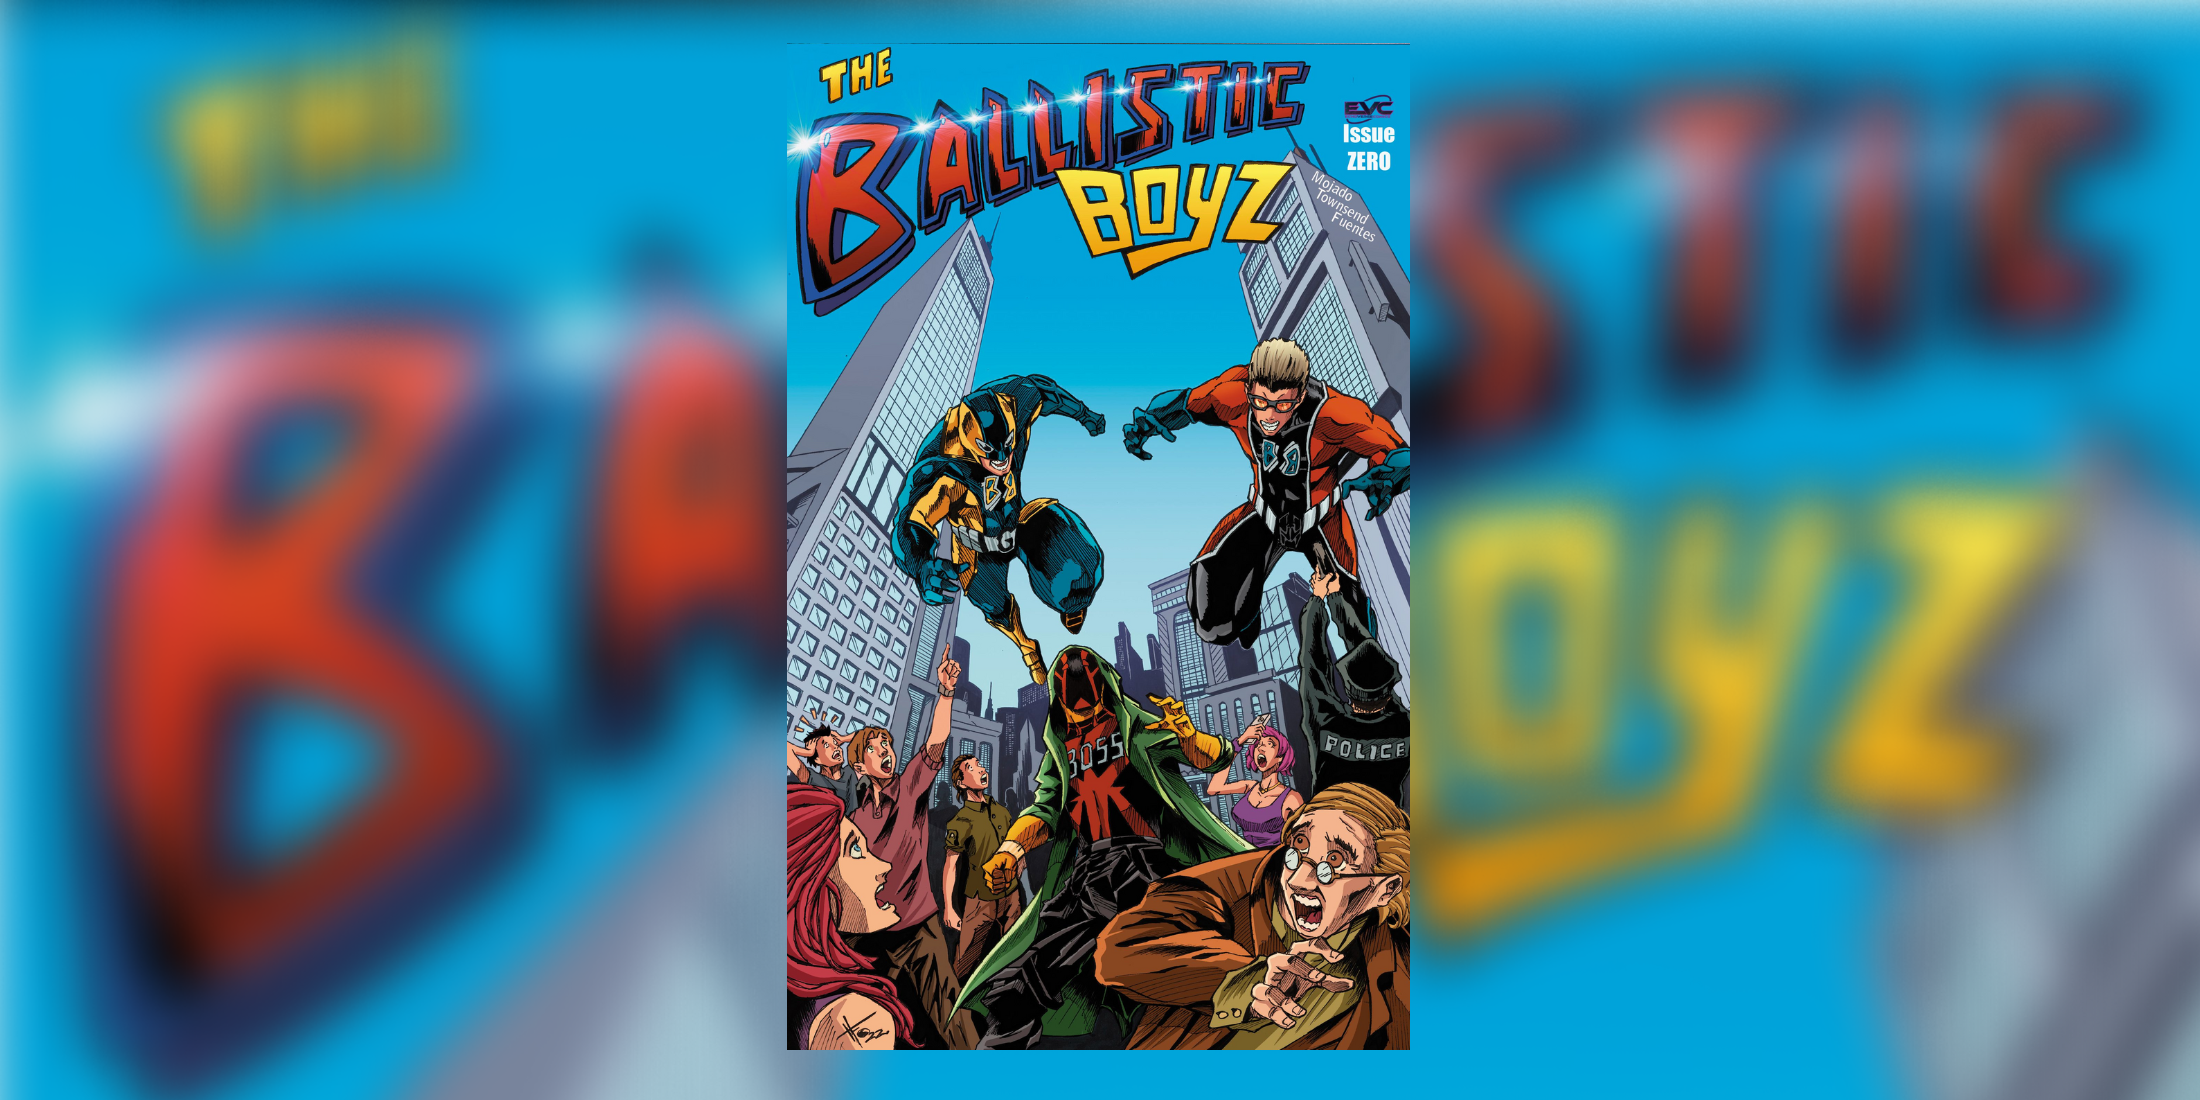 The Ballistic Boyz: And So It Begins: Join the Fight Against Cystic Fibrosis Alongside EchoVerse Comics